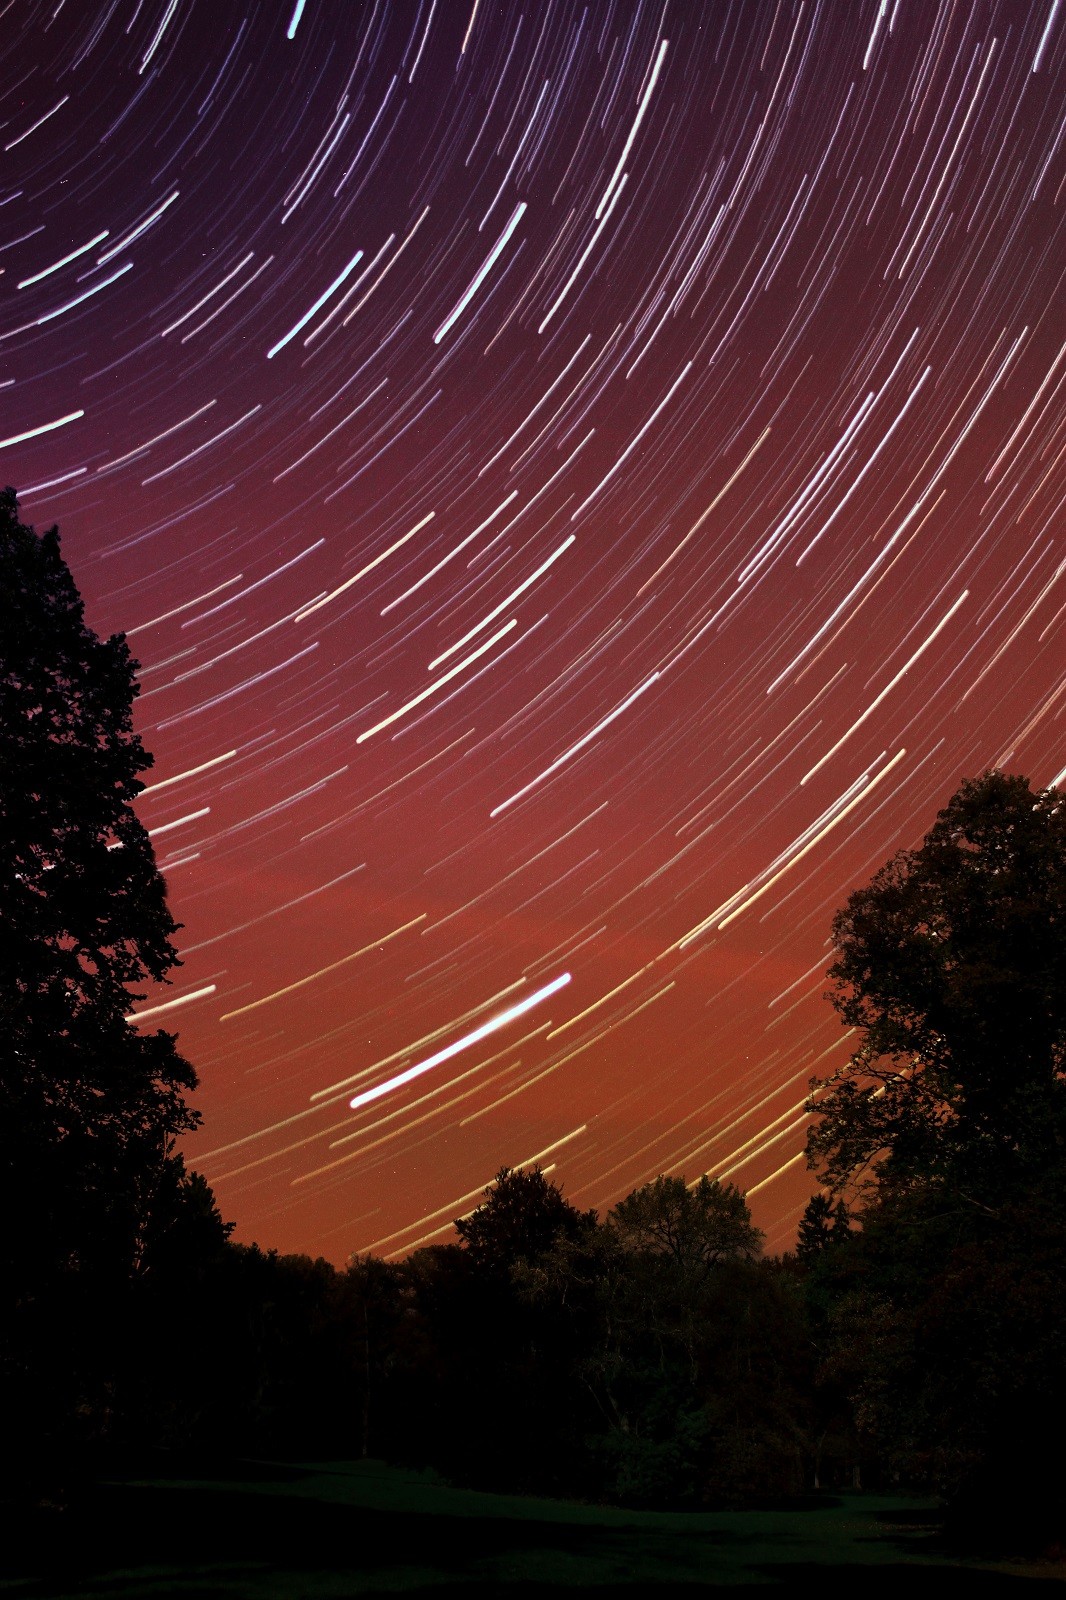 Star trails in one hour